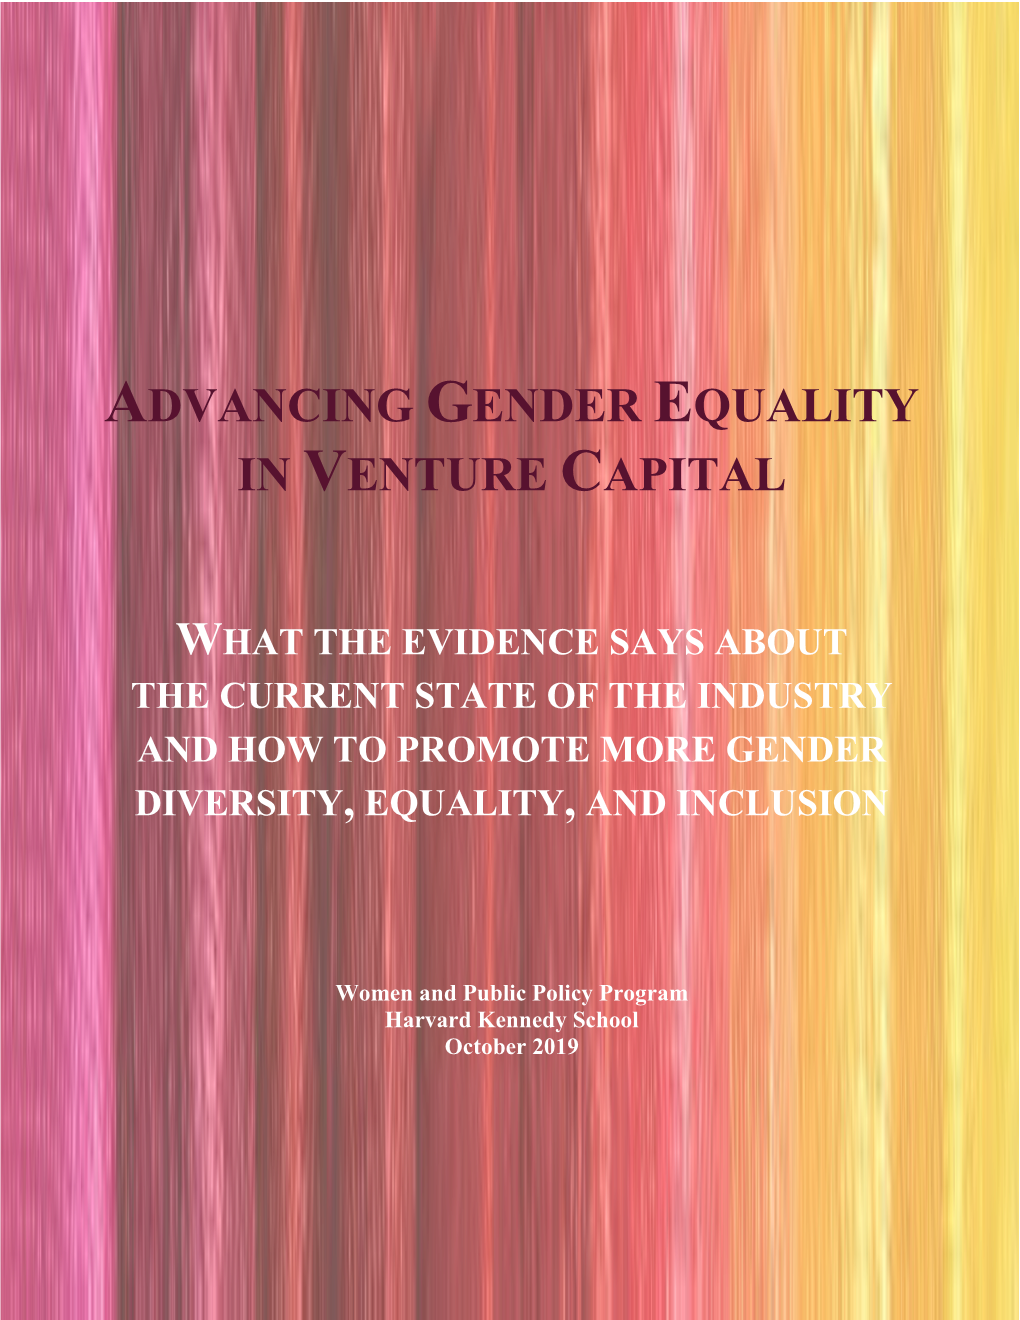 Advancing Gender Equality in Venture Capital